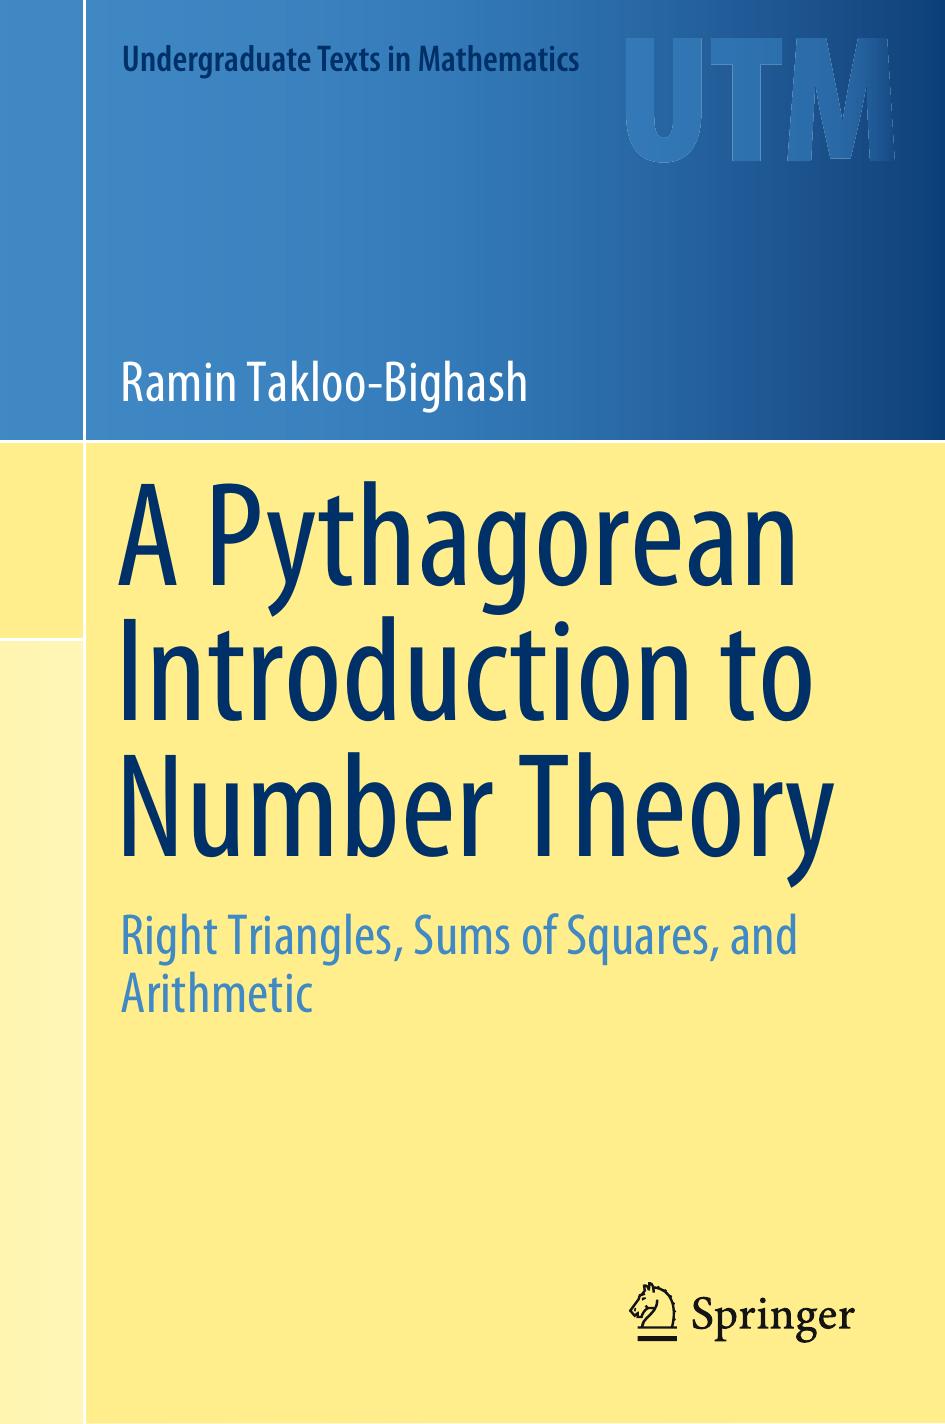 A Pythagorean Introduction to Number Theory by Ramin Takloo-Bighash